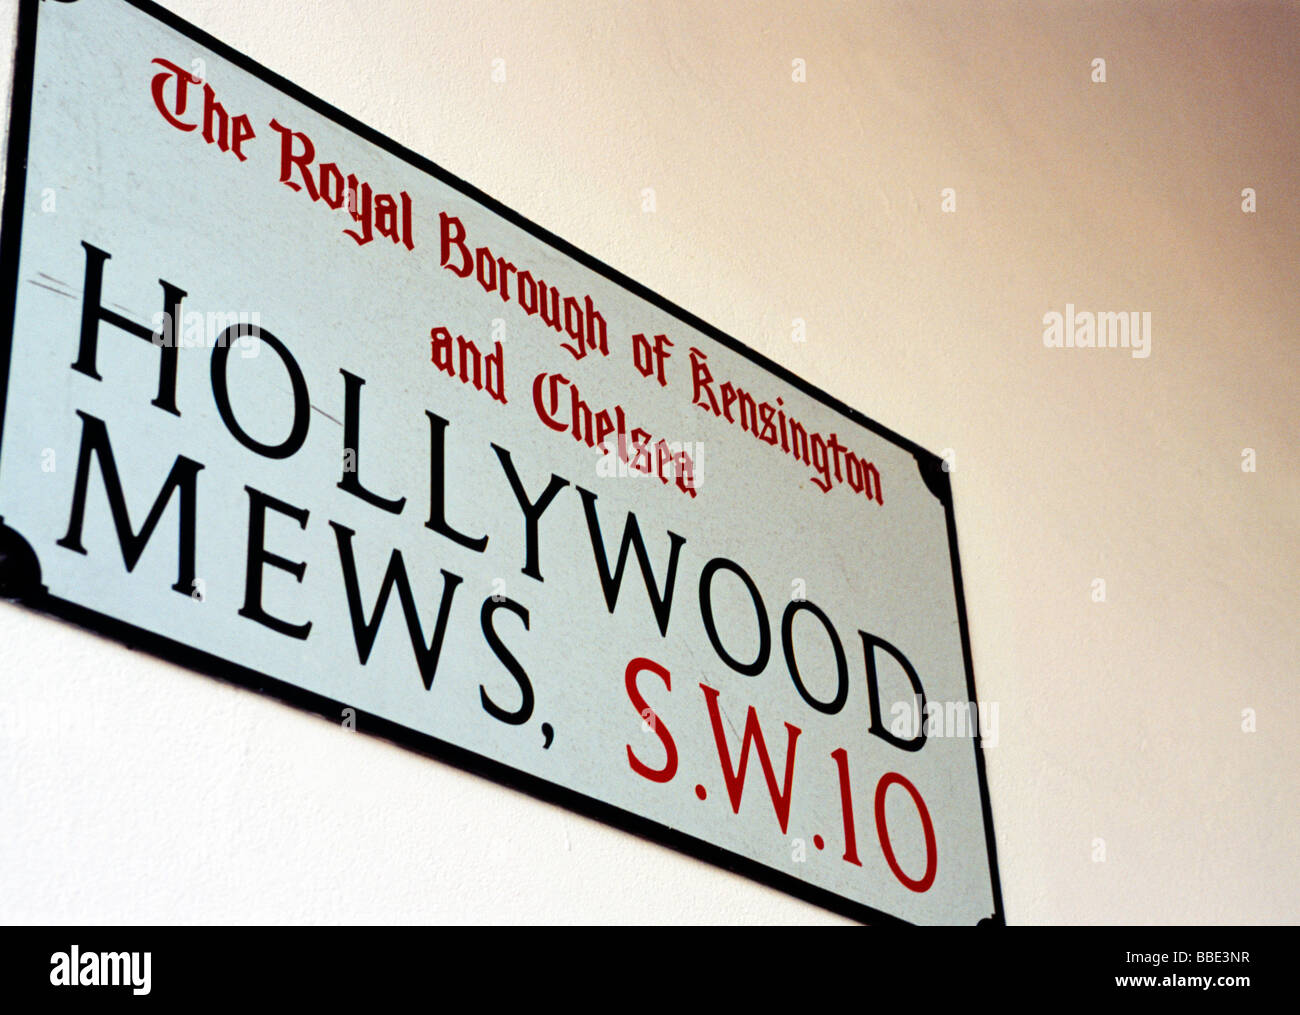 Hollywood Mews SW10, London street sign Foto Stock